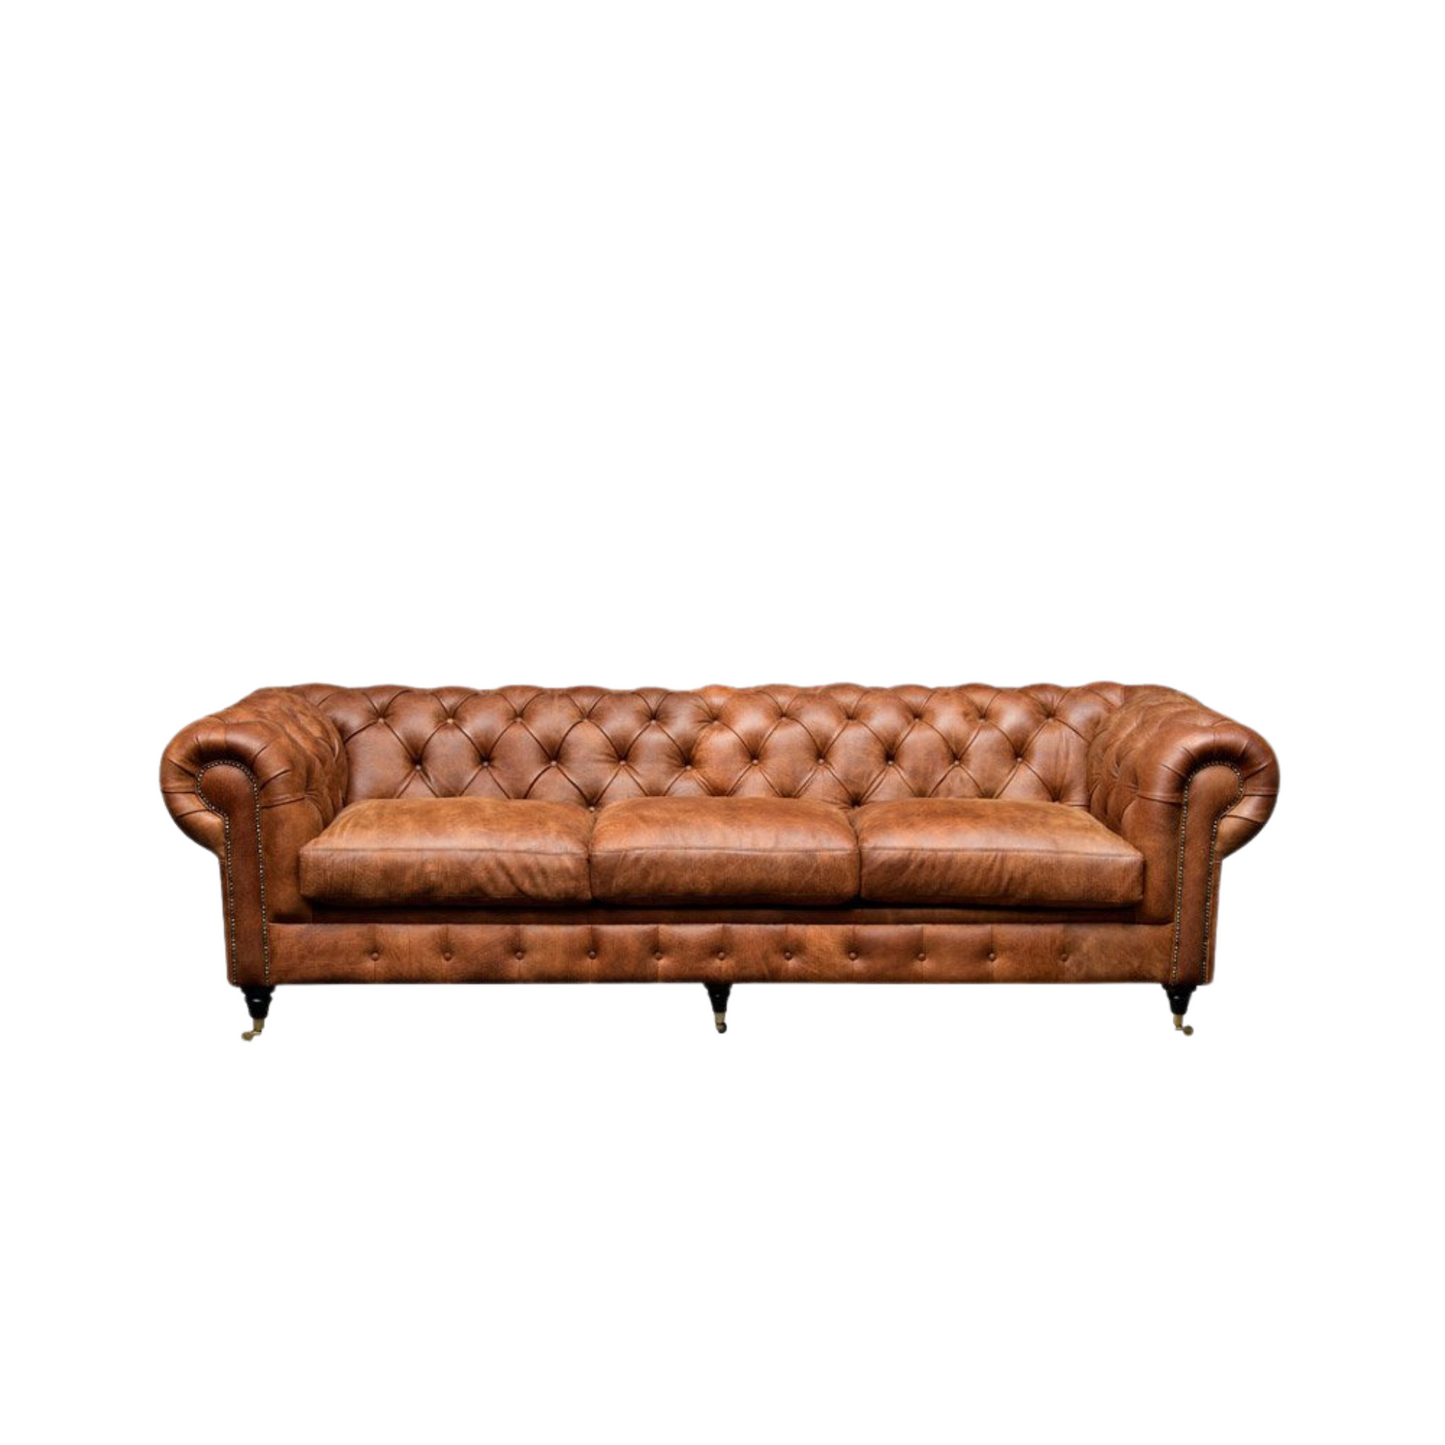 Iconic Chesterfield Sofa – The epitome of timeless old-world charm, the Chesterfield sofa, with its tufted deep buttoning, stands as a symbol of enduring elegance.  Crafted to your exact specifications, this iconic piece is custom manufactured in our premium leathers and fabrics, ensuring a touch of luxury tailored to your personal style.